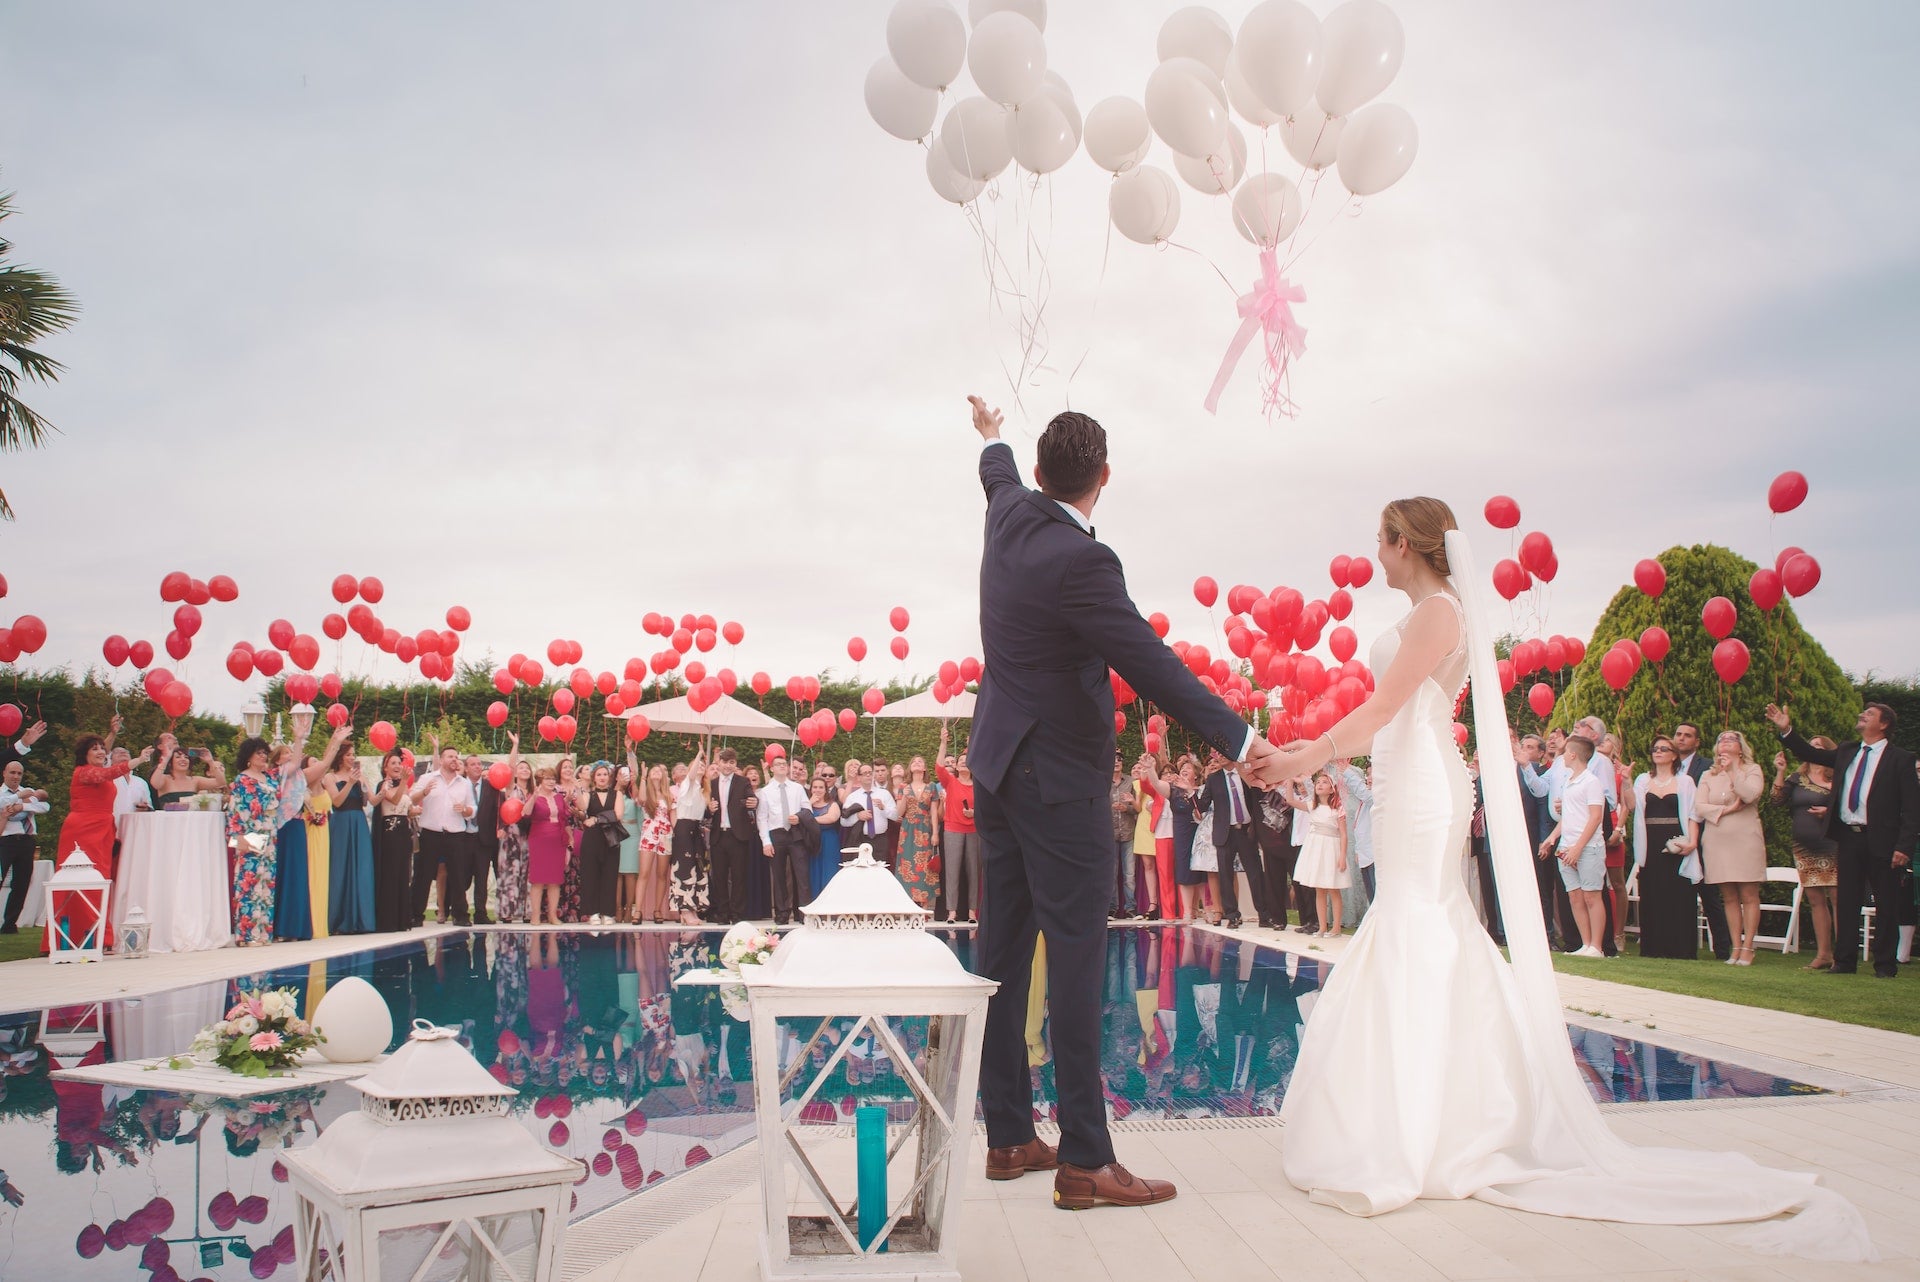 6 Unique Ideas to Make Your Second Wedding Special